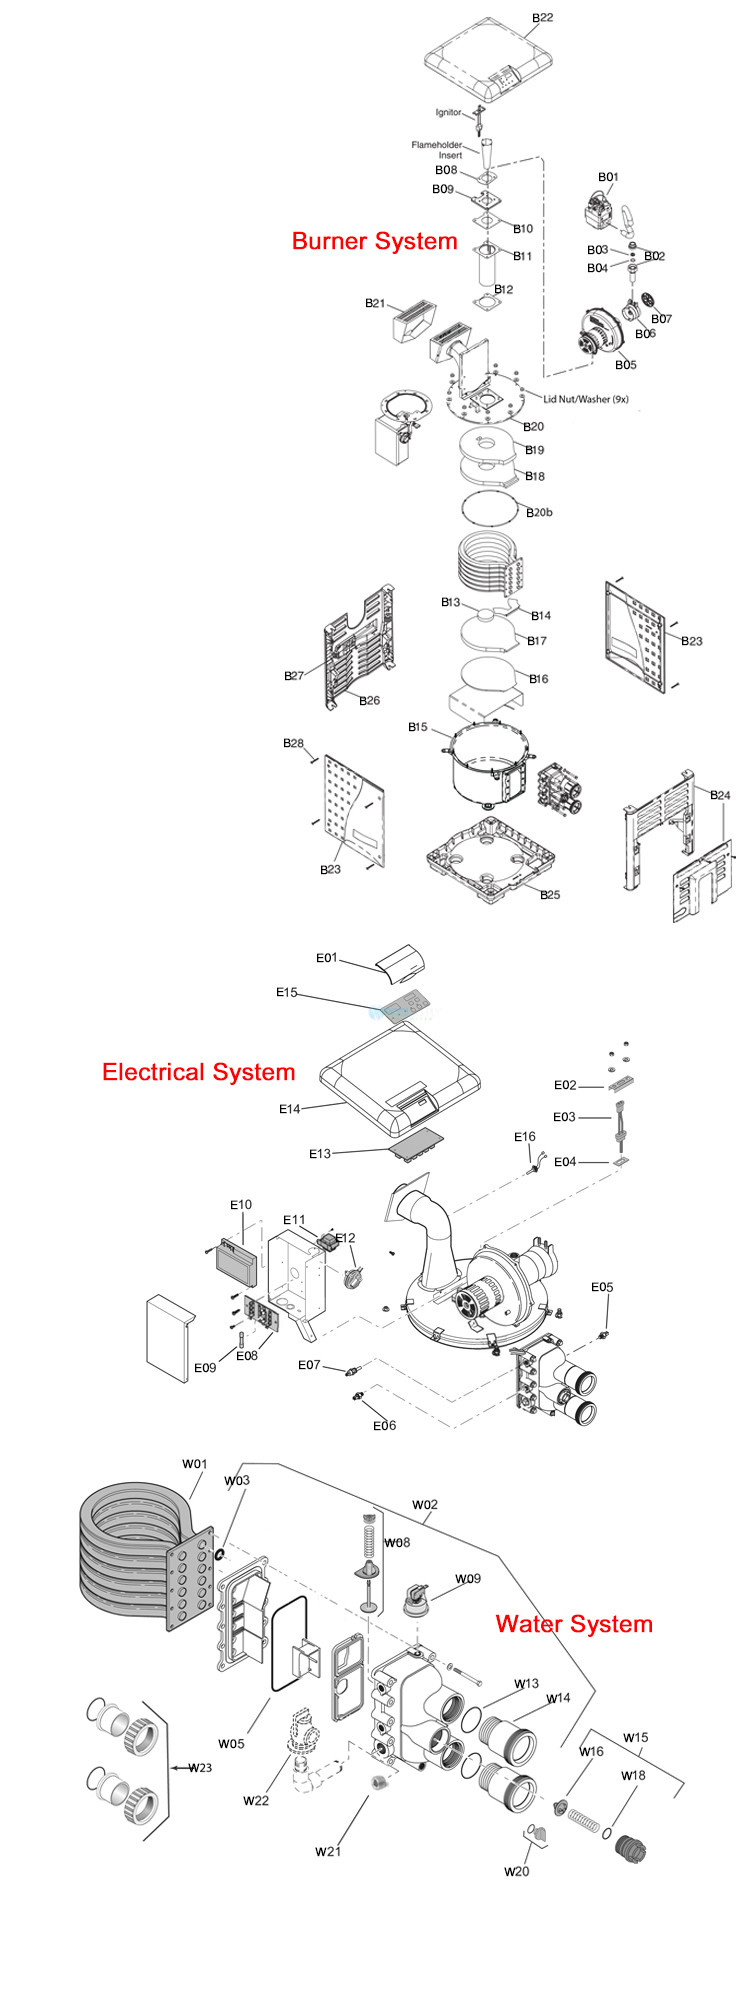 Pentair MasterTemp Low NOx Commercial Swimming Pool Heater - Electronic Ignition - Natural Gas - 400,000 BTU ASME - 460775 Parts Schematic